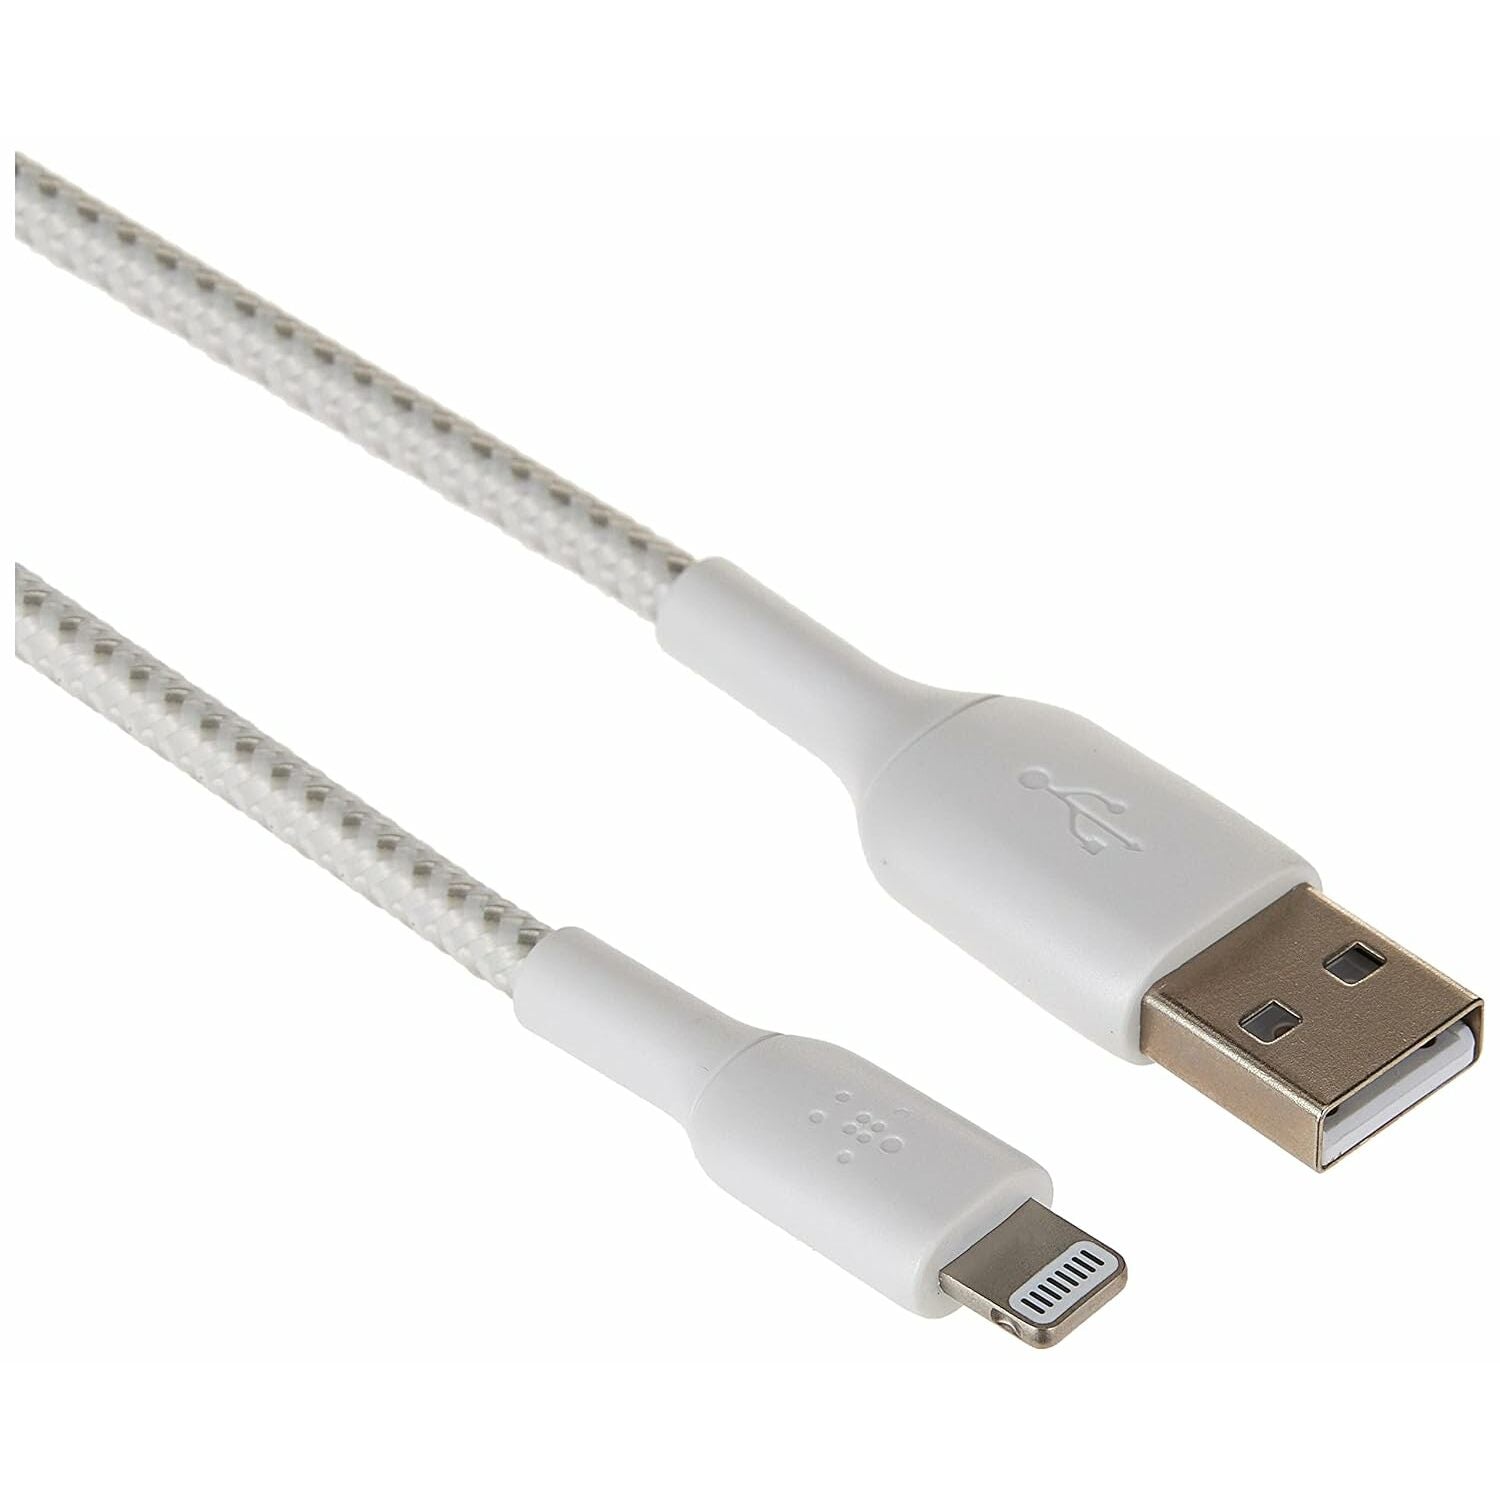 Belkin BoostCharge Braided Lightning to USB Cable Charging Cord - 3.3ft